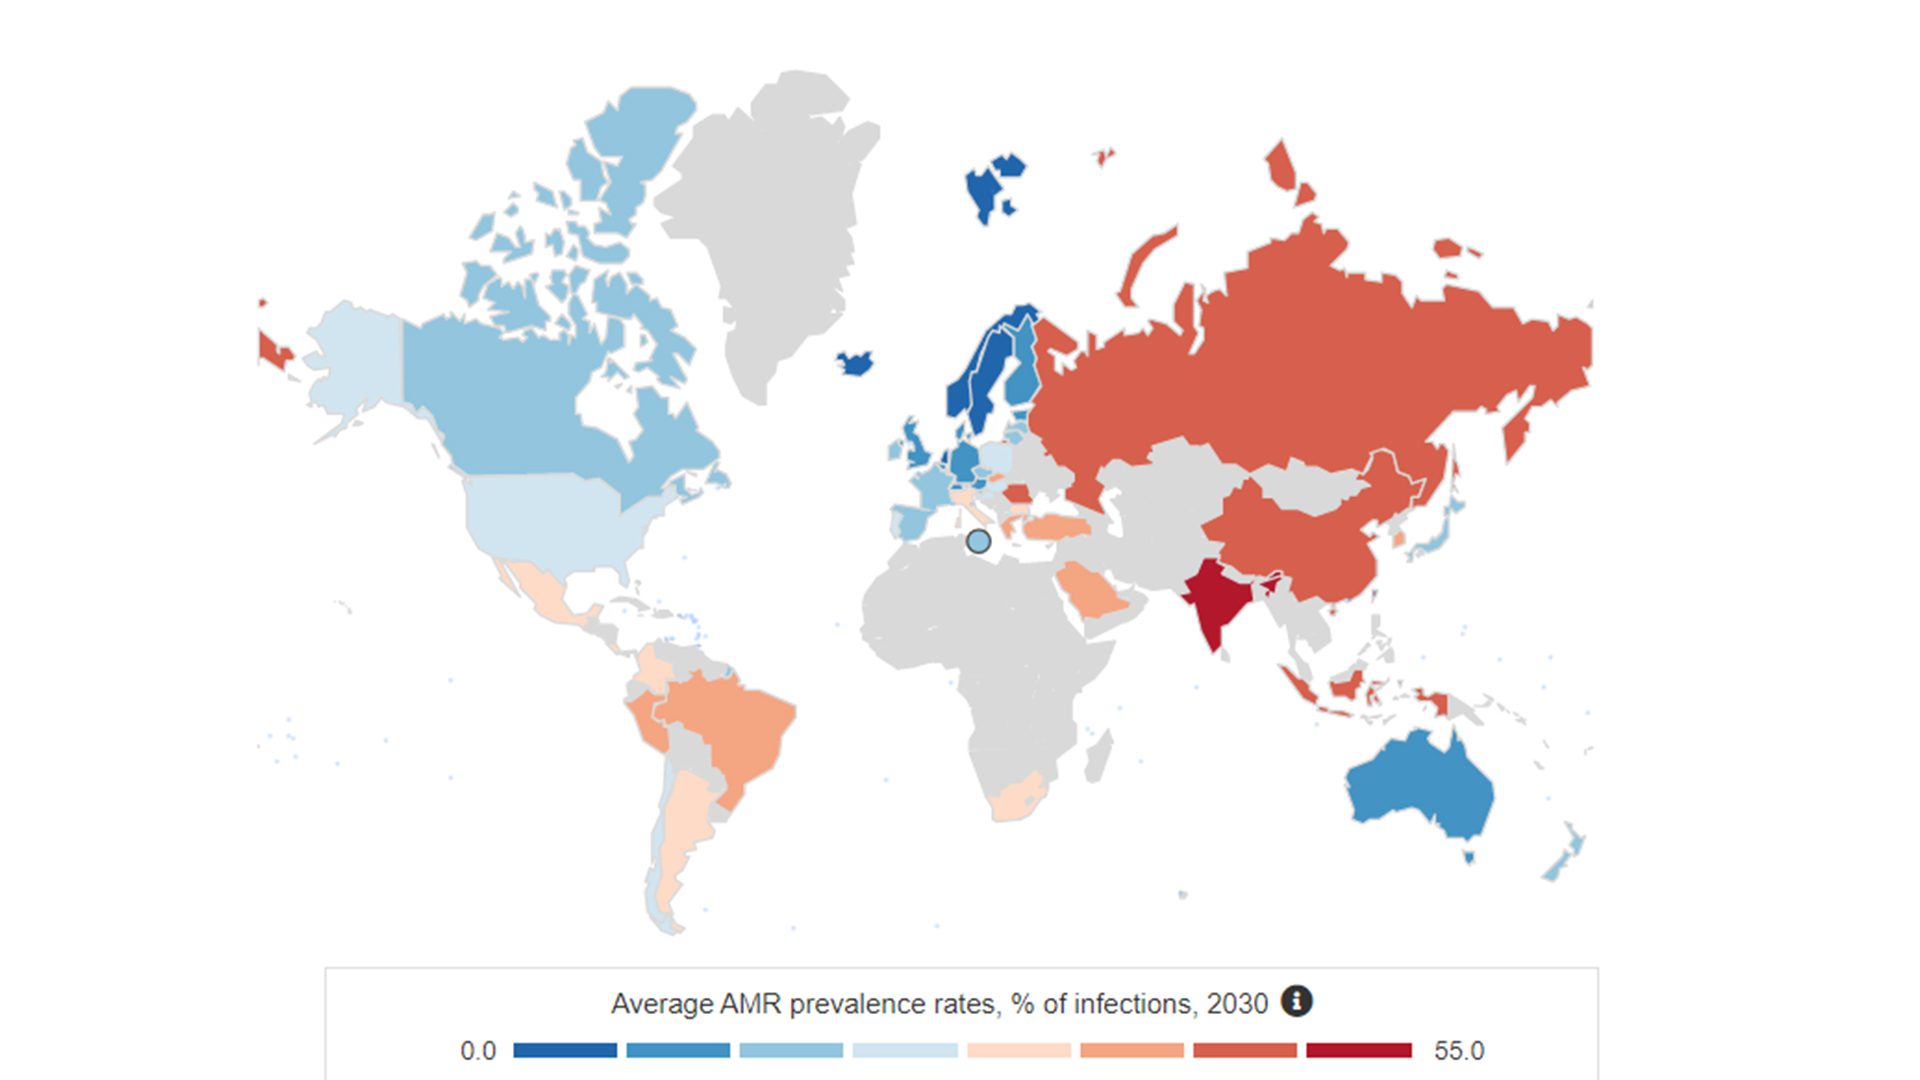 OECD projections of average global prevalence rates of antimicrobial resistance by 2030 [2]